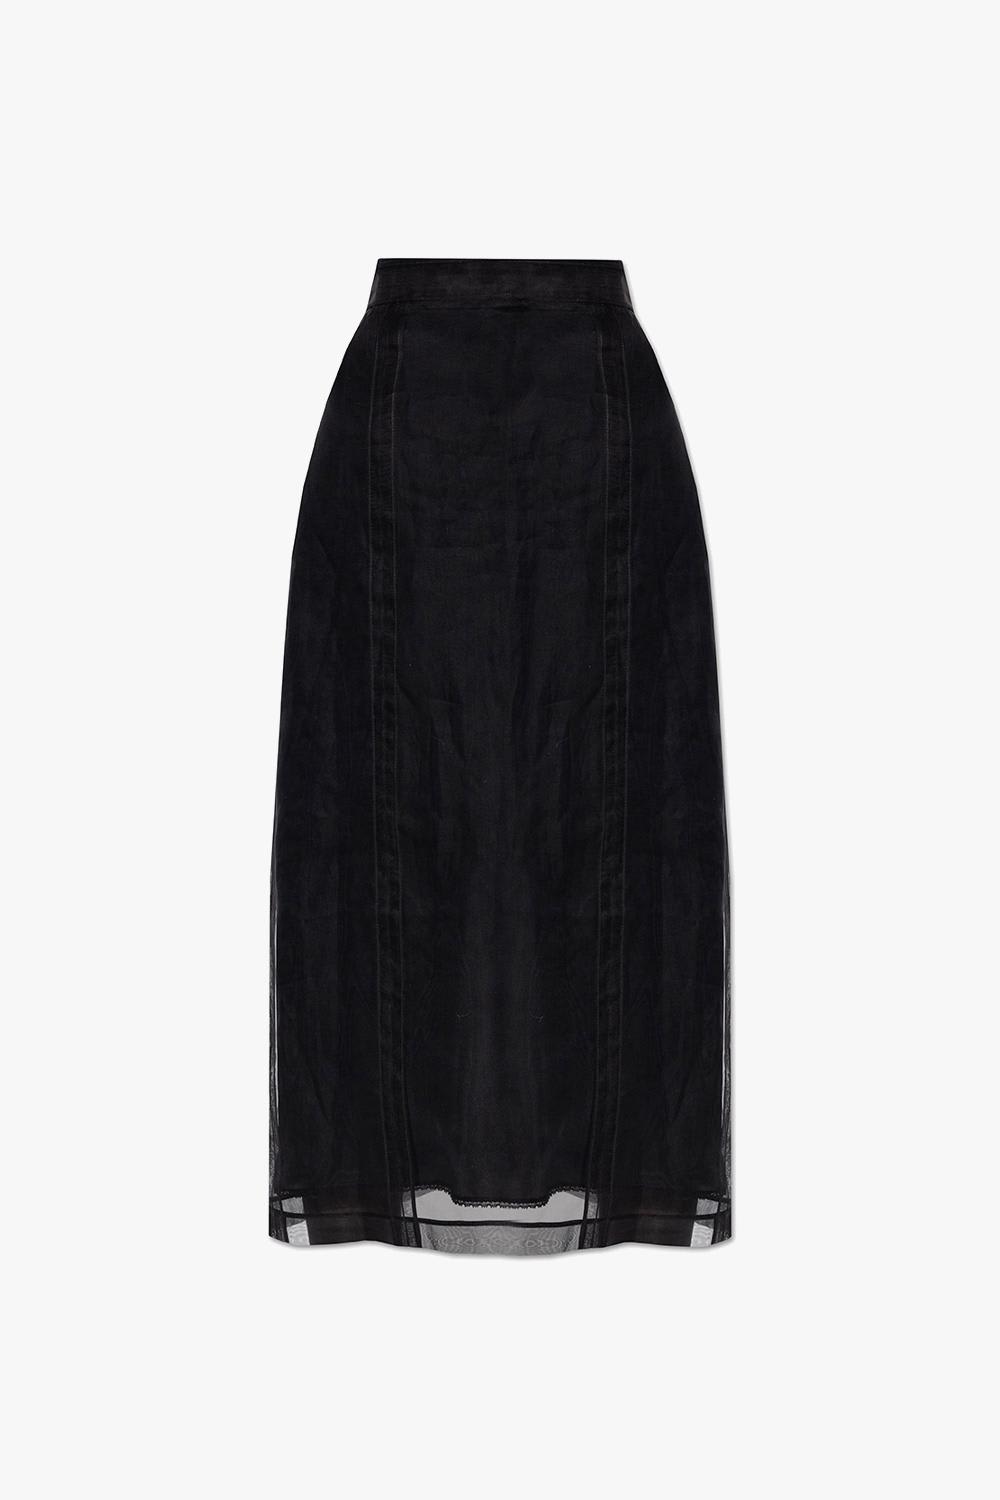 Gucci Two-layered Skirt